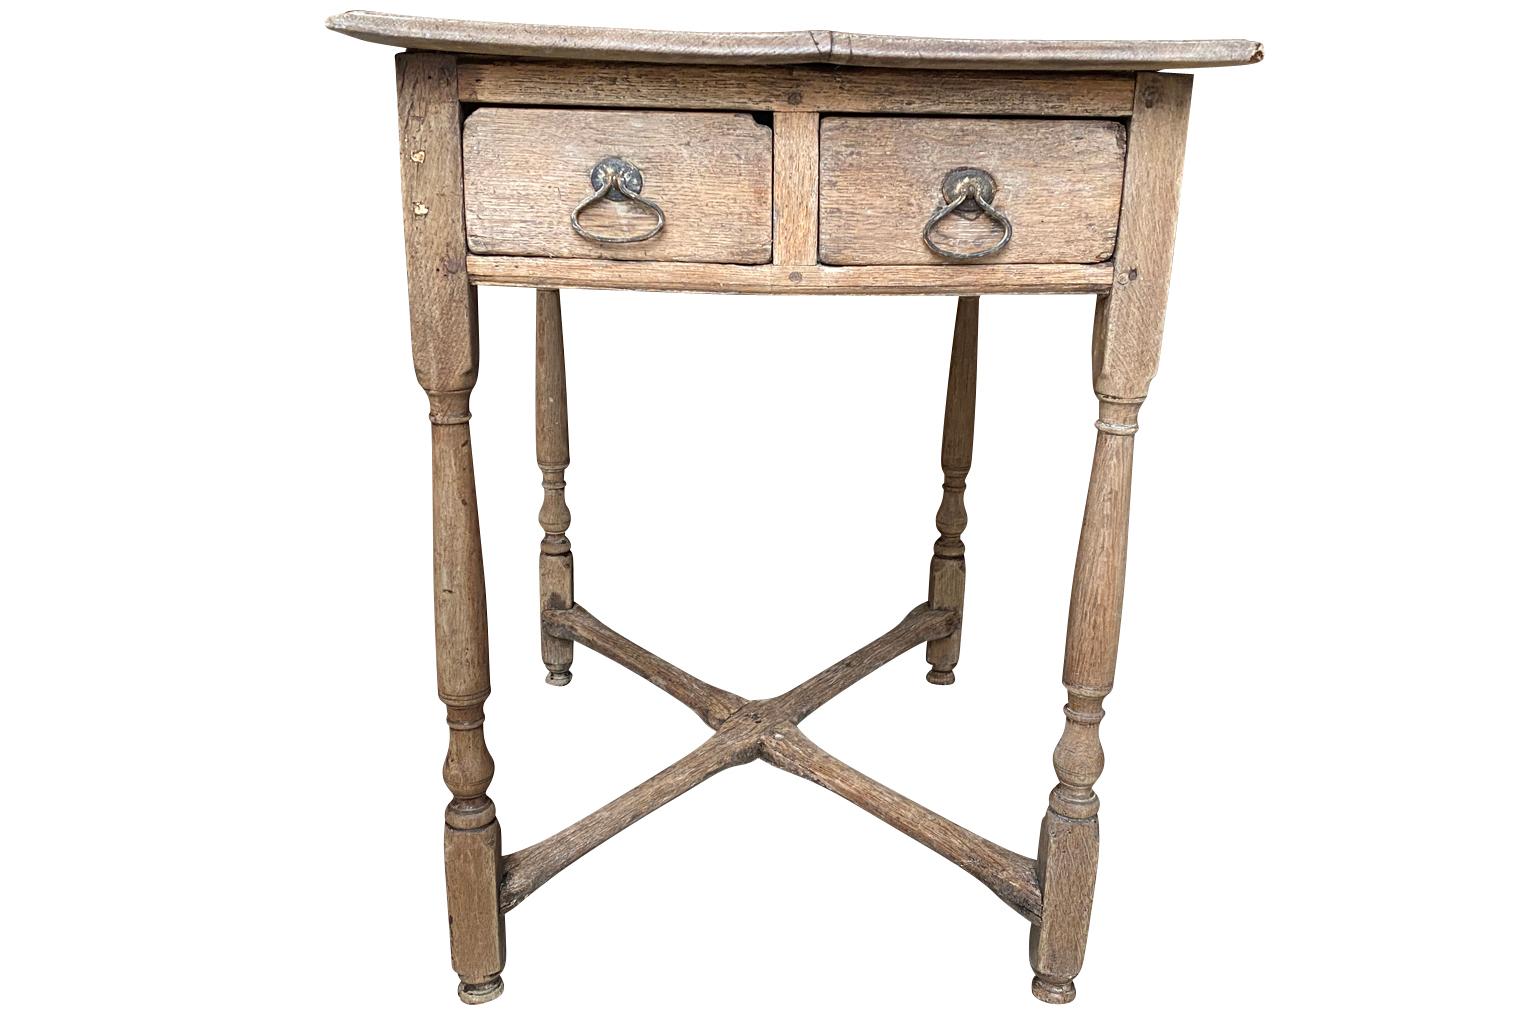 A very lovely 18th century side table from the South of France. Wonderfully constructed from oak with double drawers, nicely turned legs, X stretcher and beautiful hardware. A very charming piece with wonderful patina.